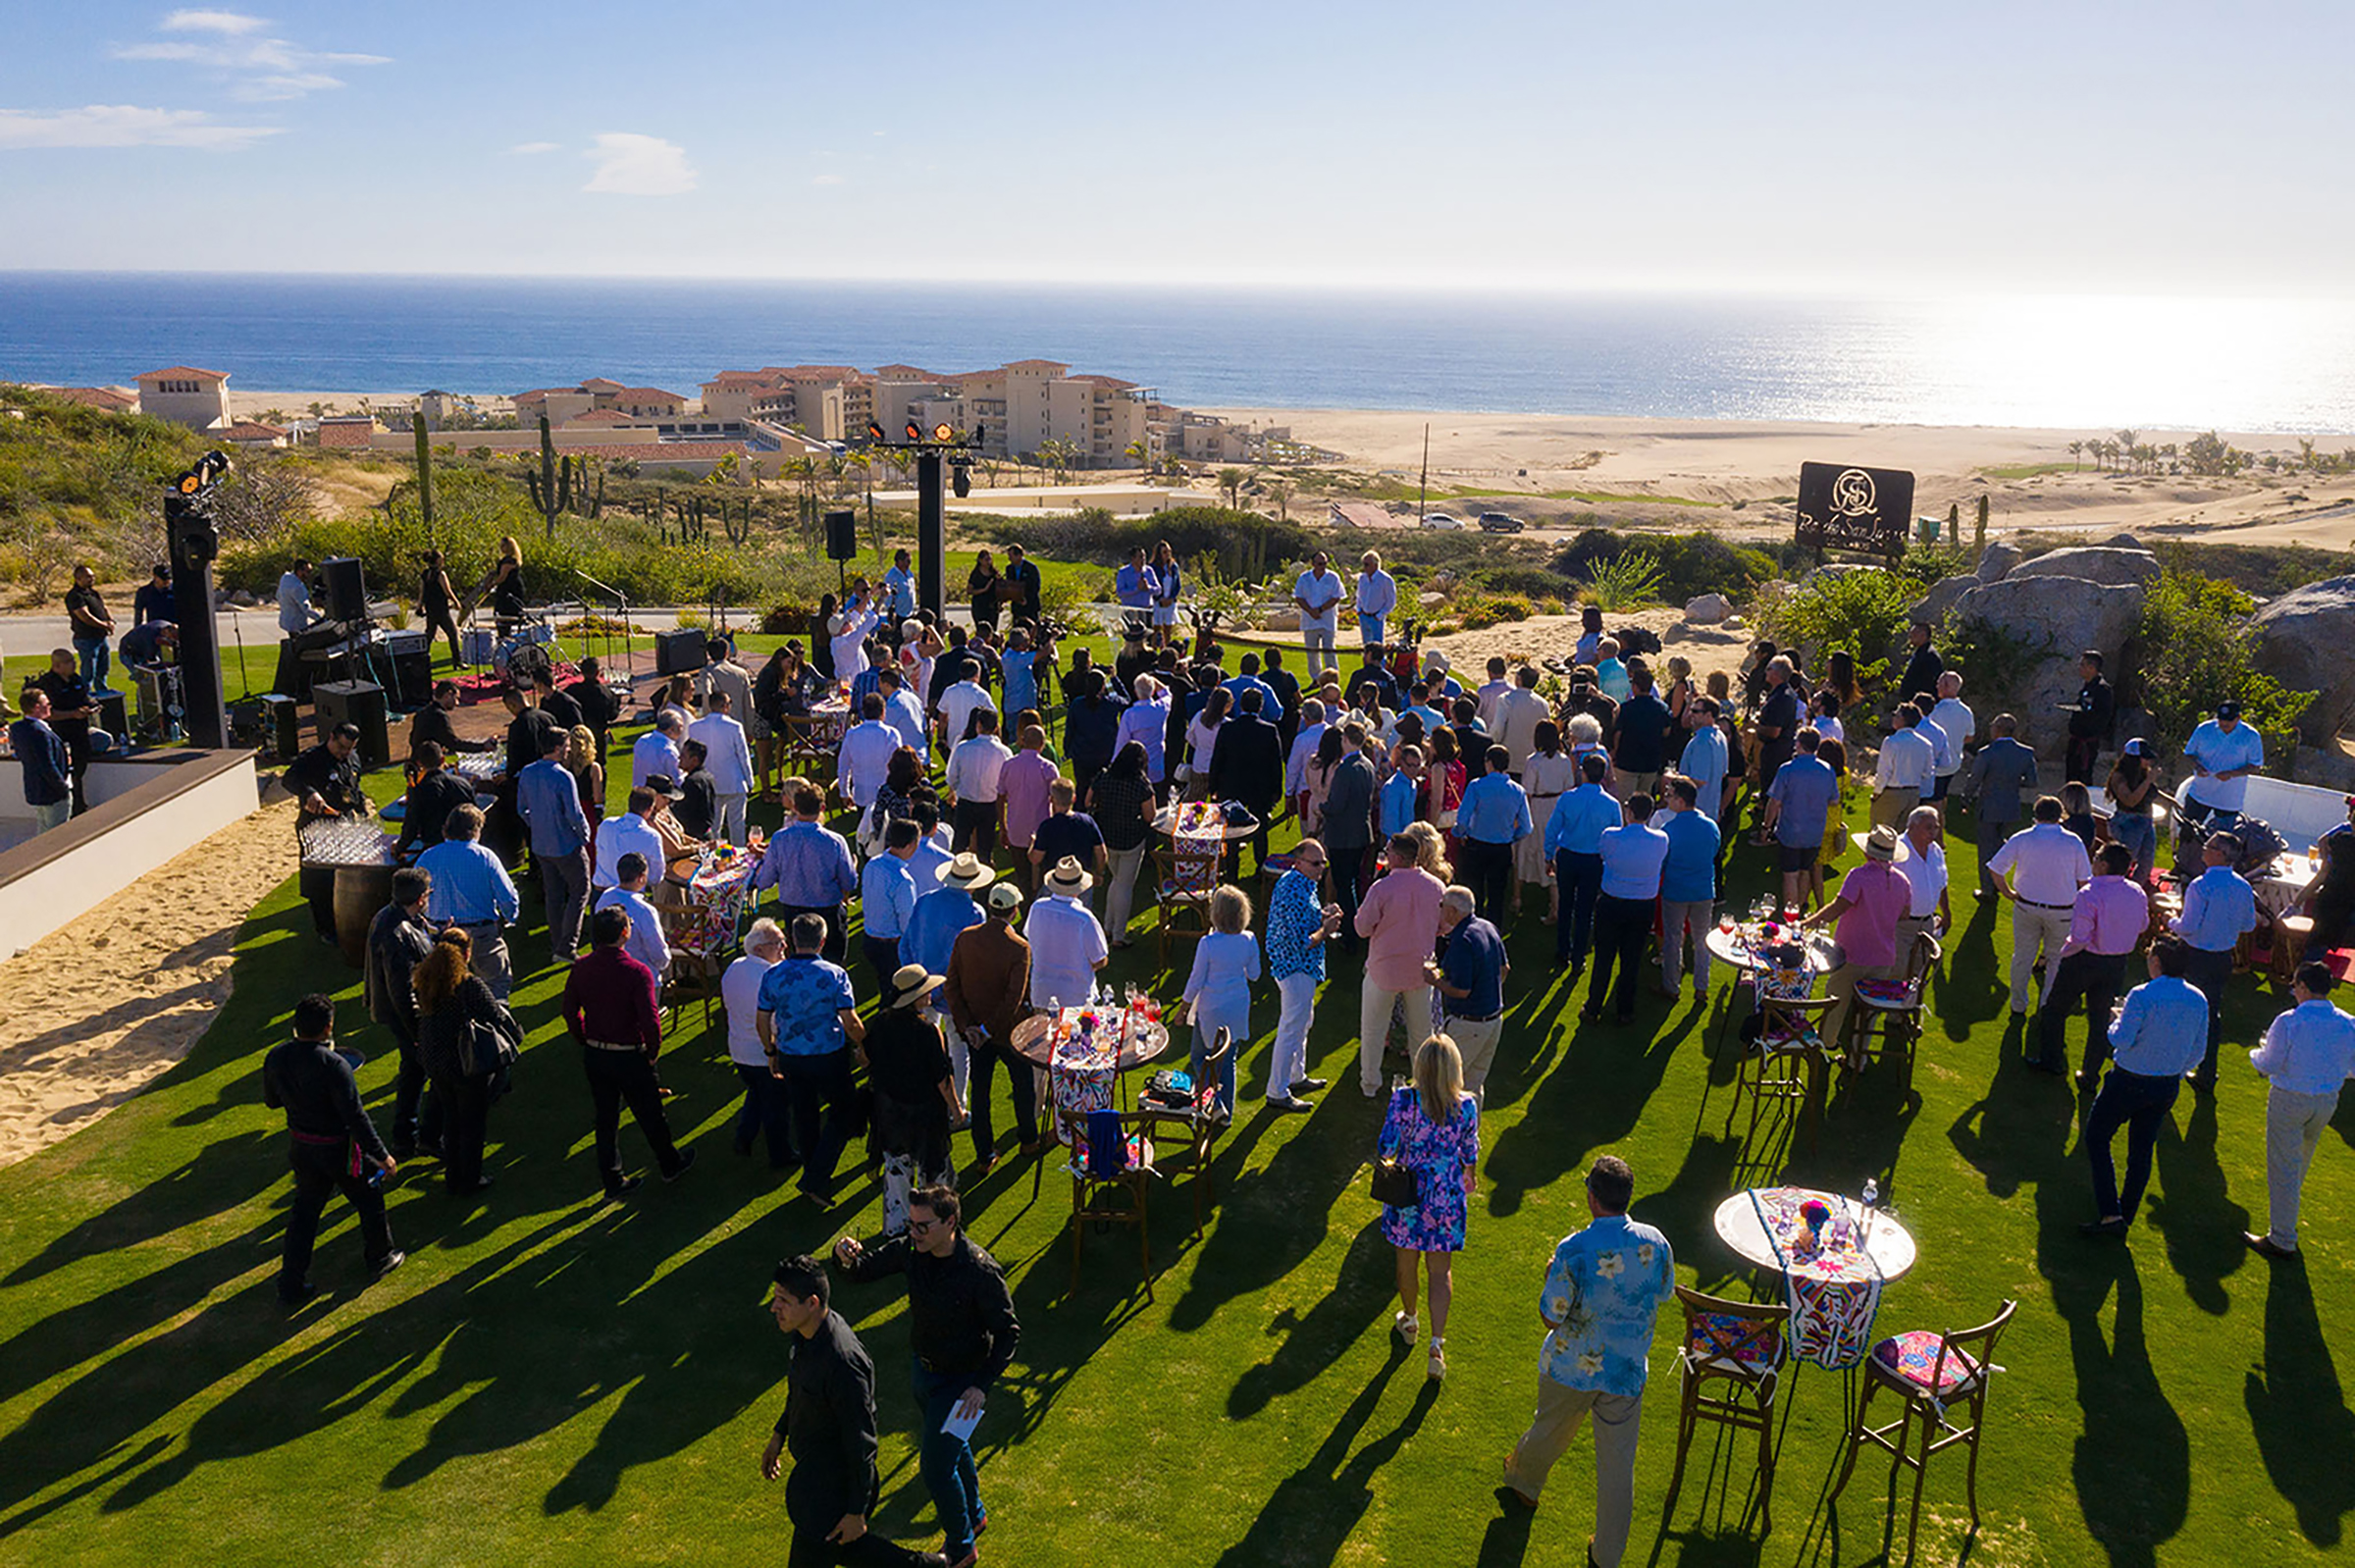 People gather at the opening of the Rancho San Lucas golf course overlooking the ocean.